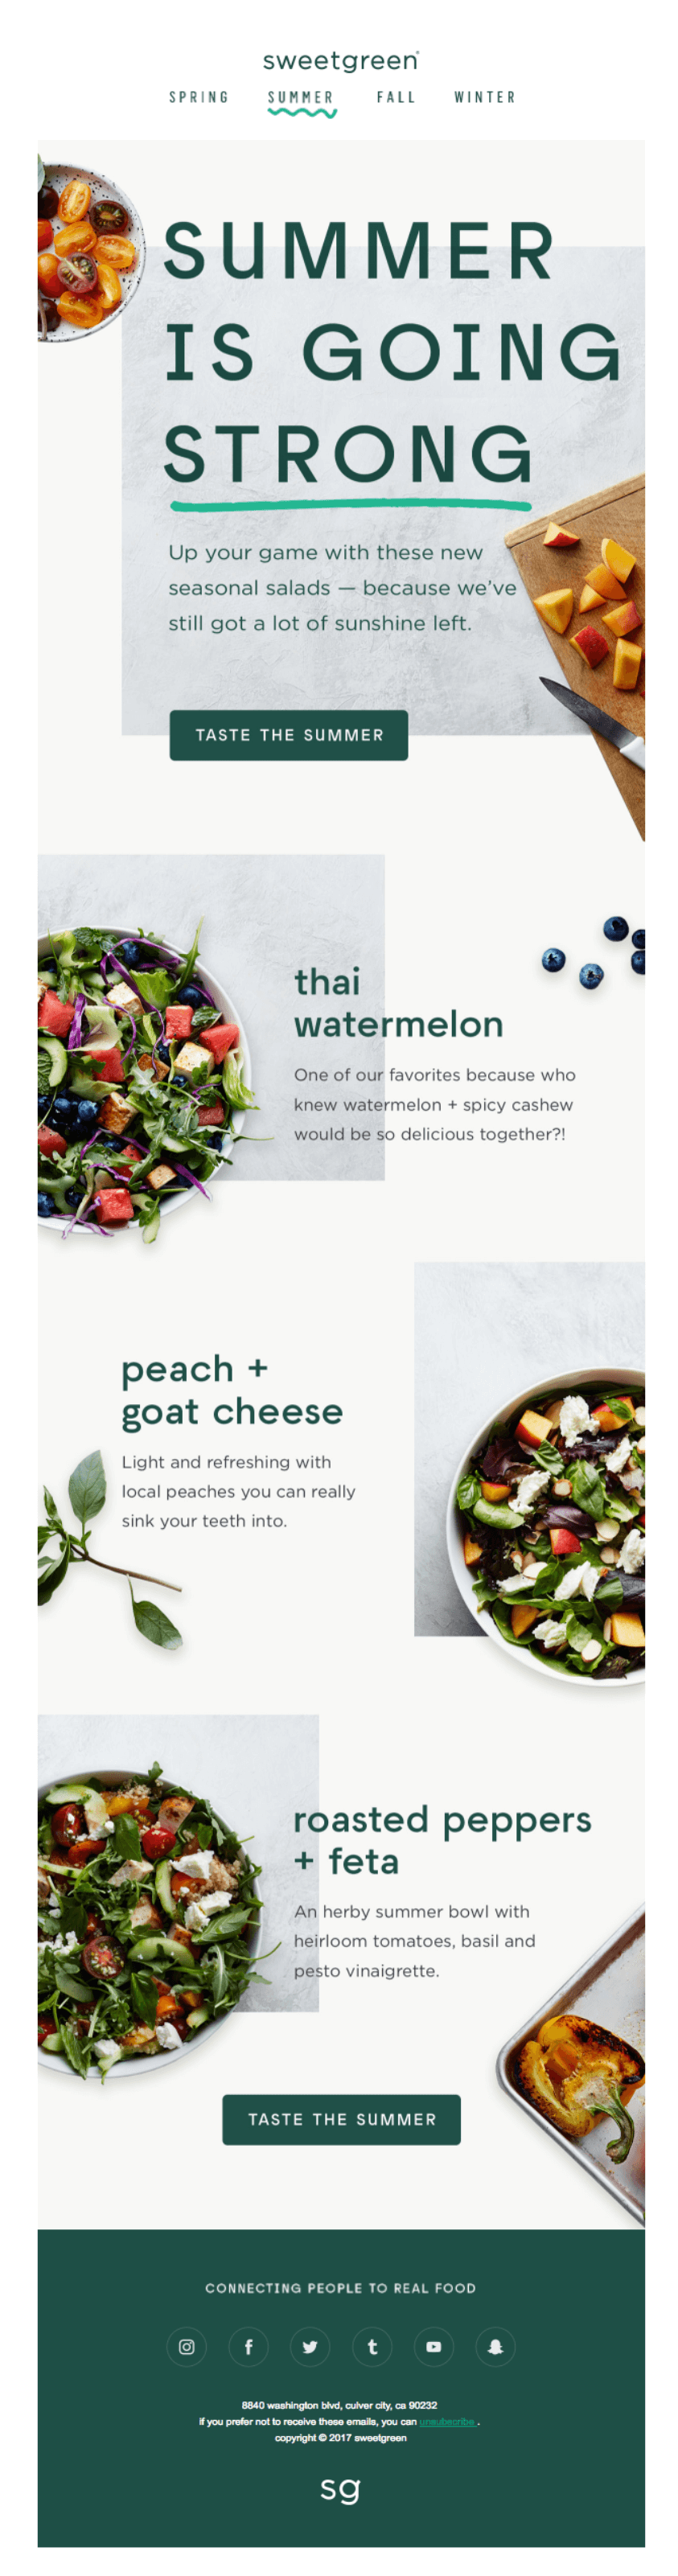 Sweetgreen’s email campaign